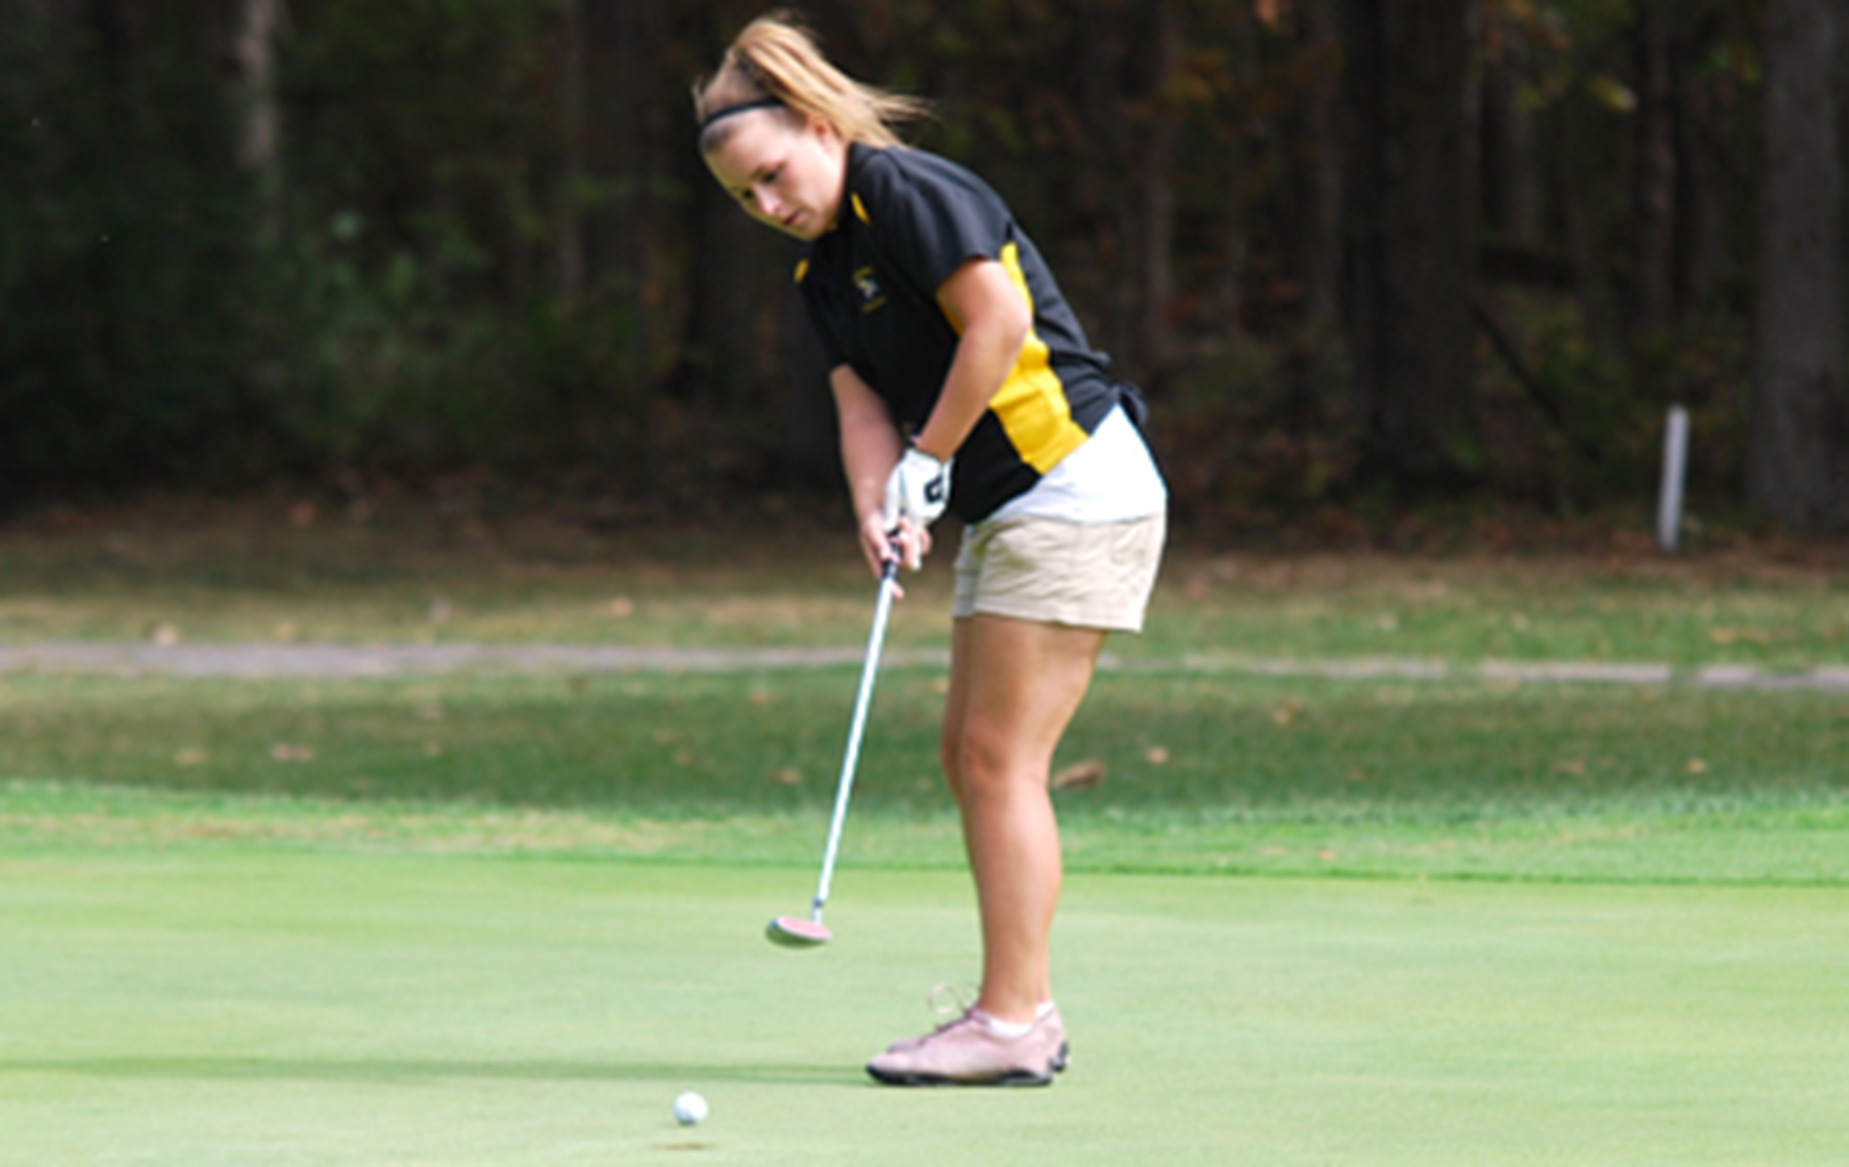 Westfall Leads Lady Jackets at Spiess Memorial